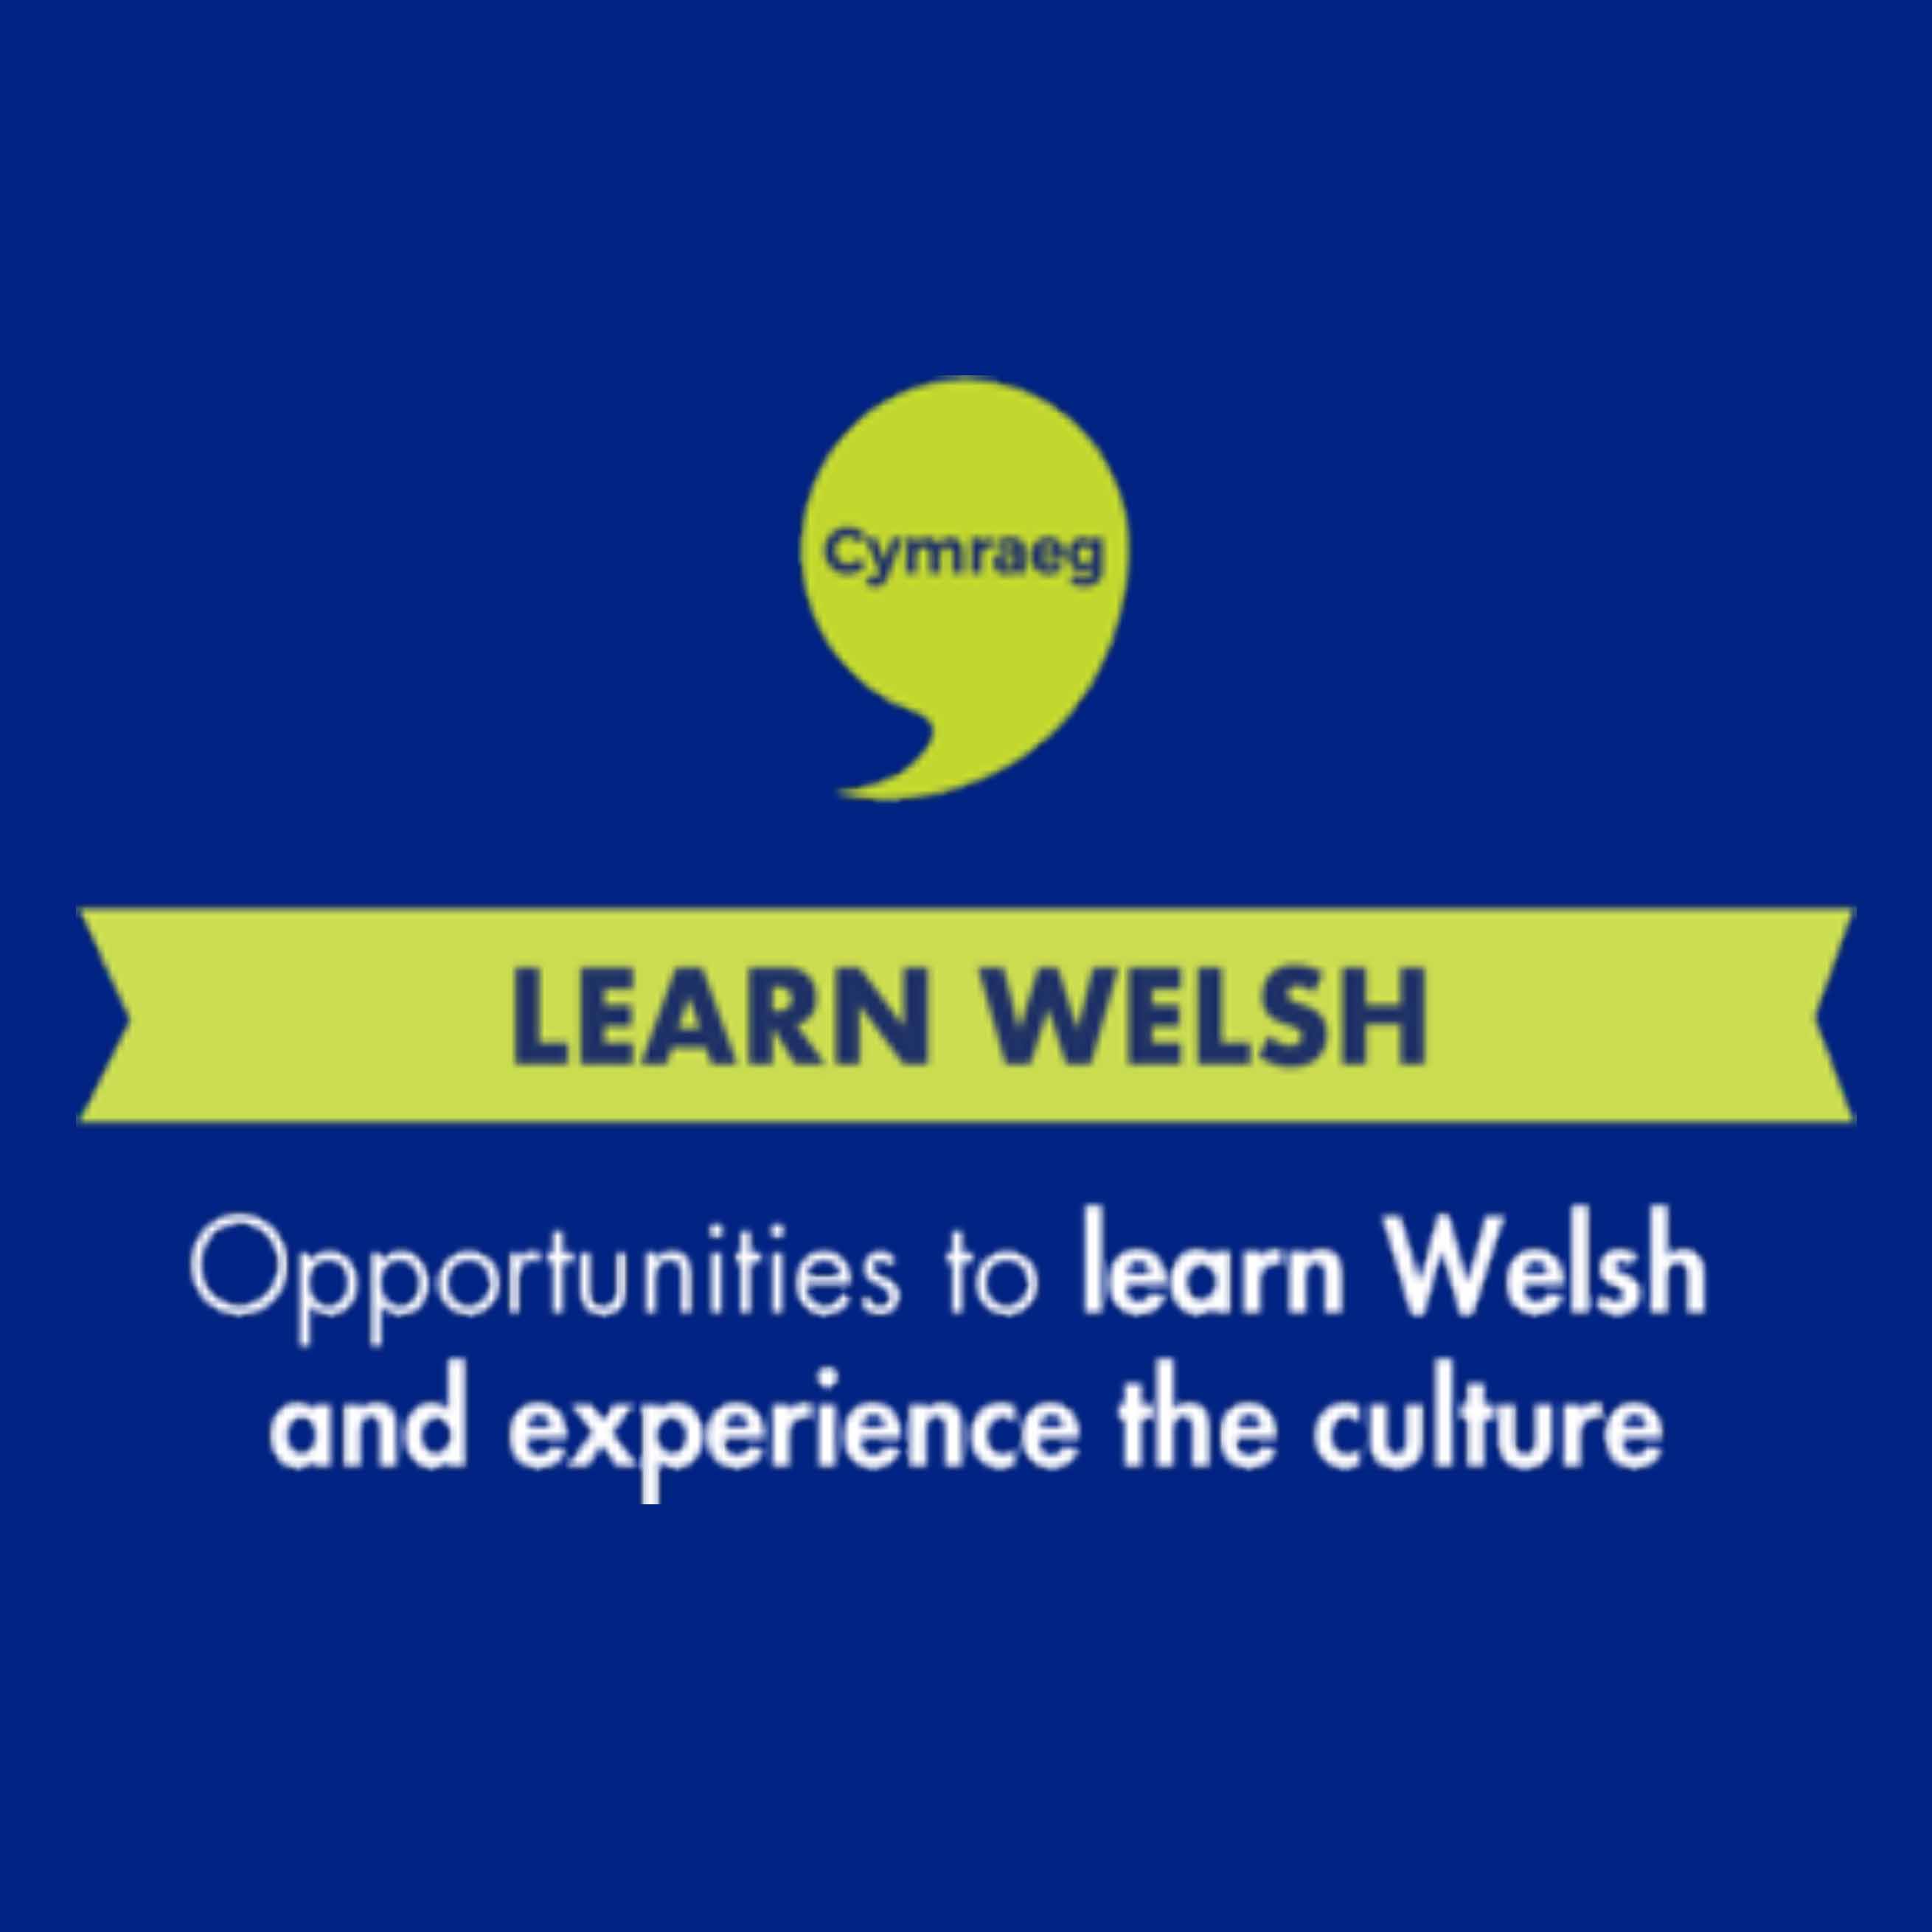 Opportunities to learn Welsh and experience the culture